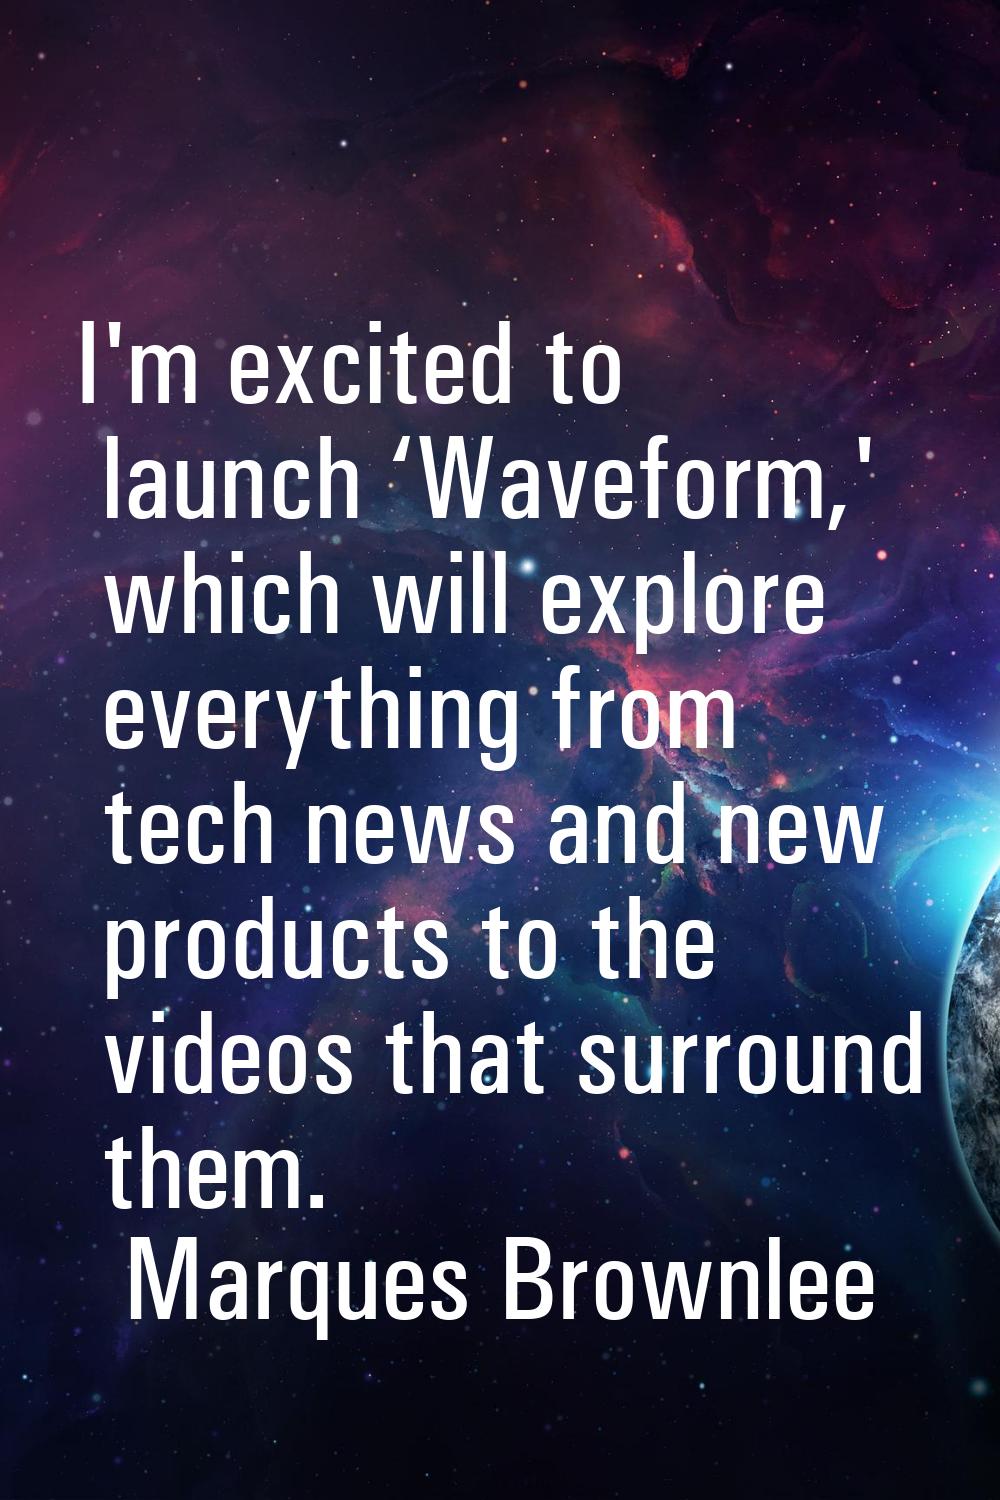 I'm excited to launch ‘Waveform,' which will explore everything from tech news and new products to 